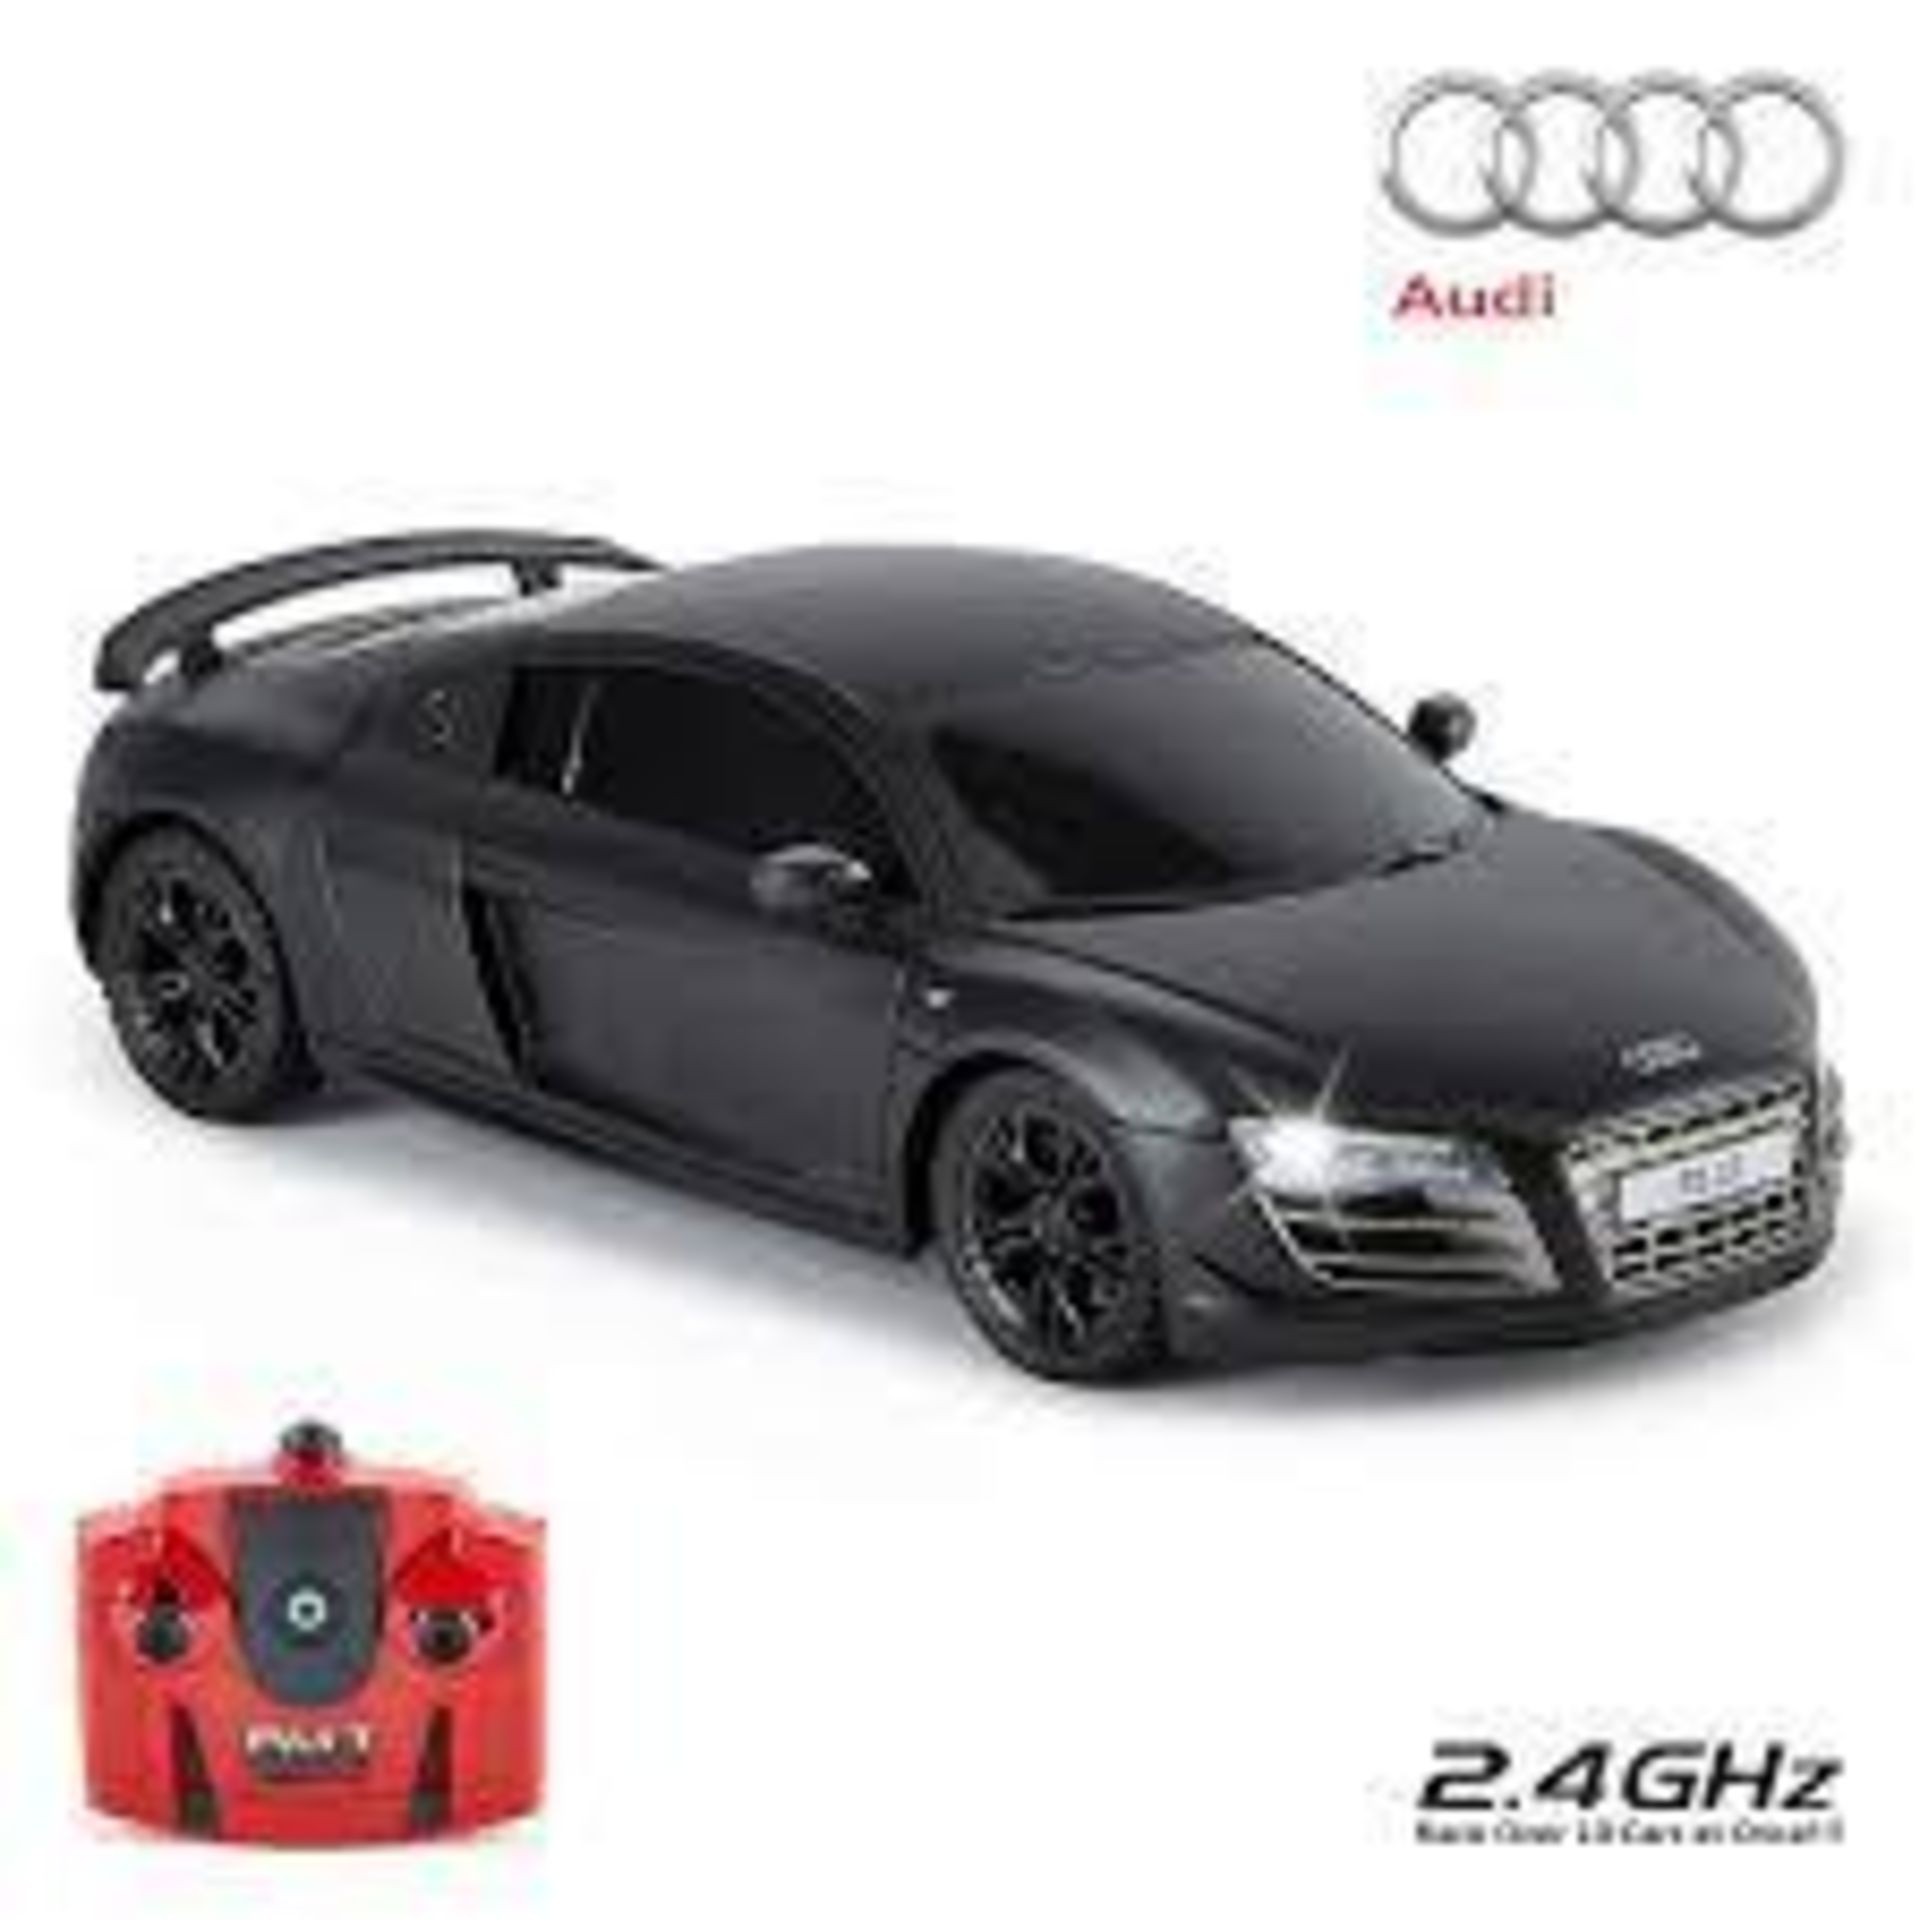 CMJ RC Cars AUDI R8 GT, Official Licensed Remote Control Car - £16.94 RRP